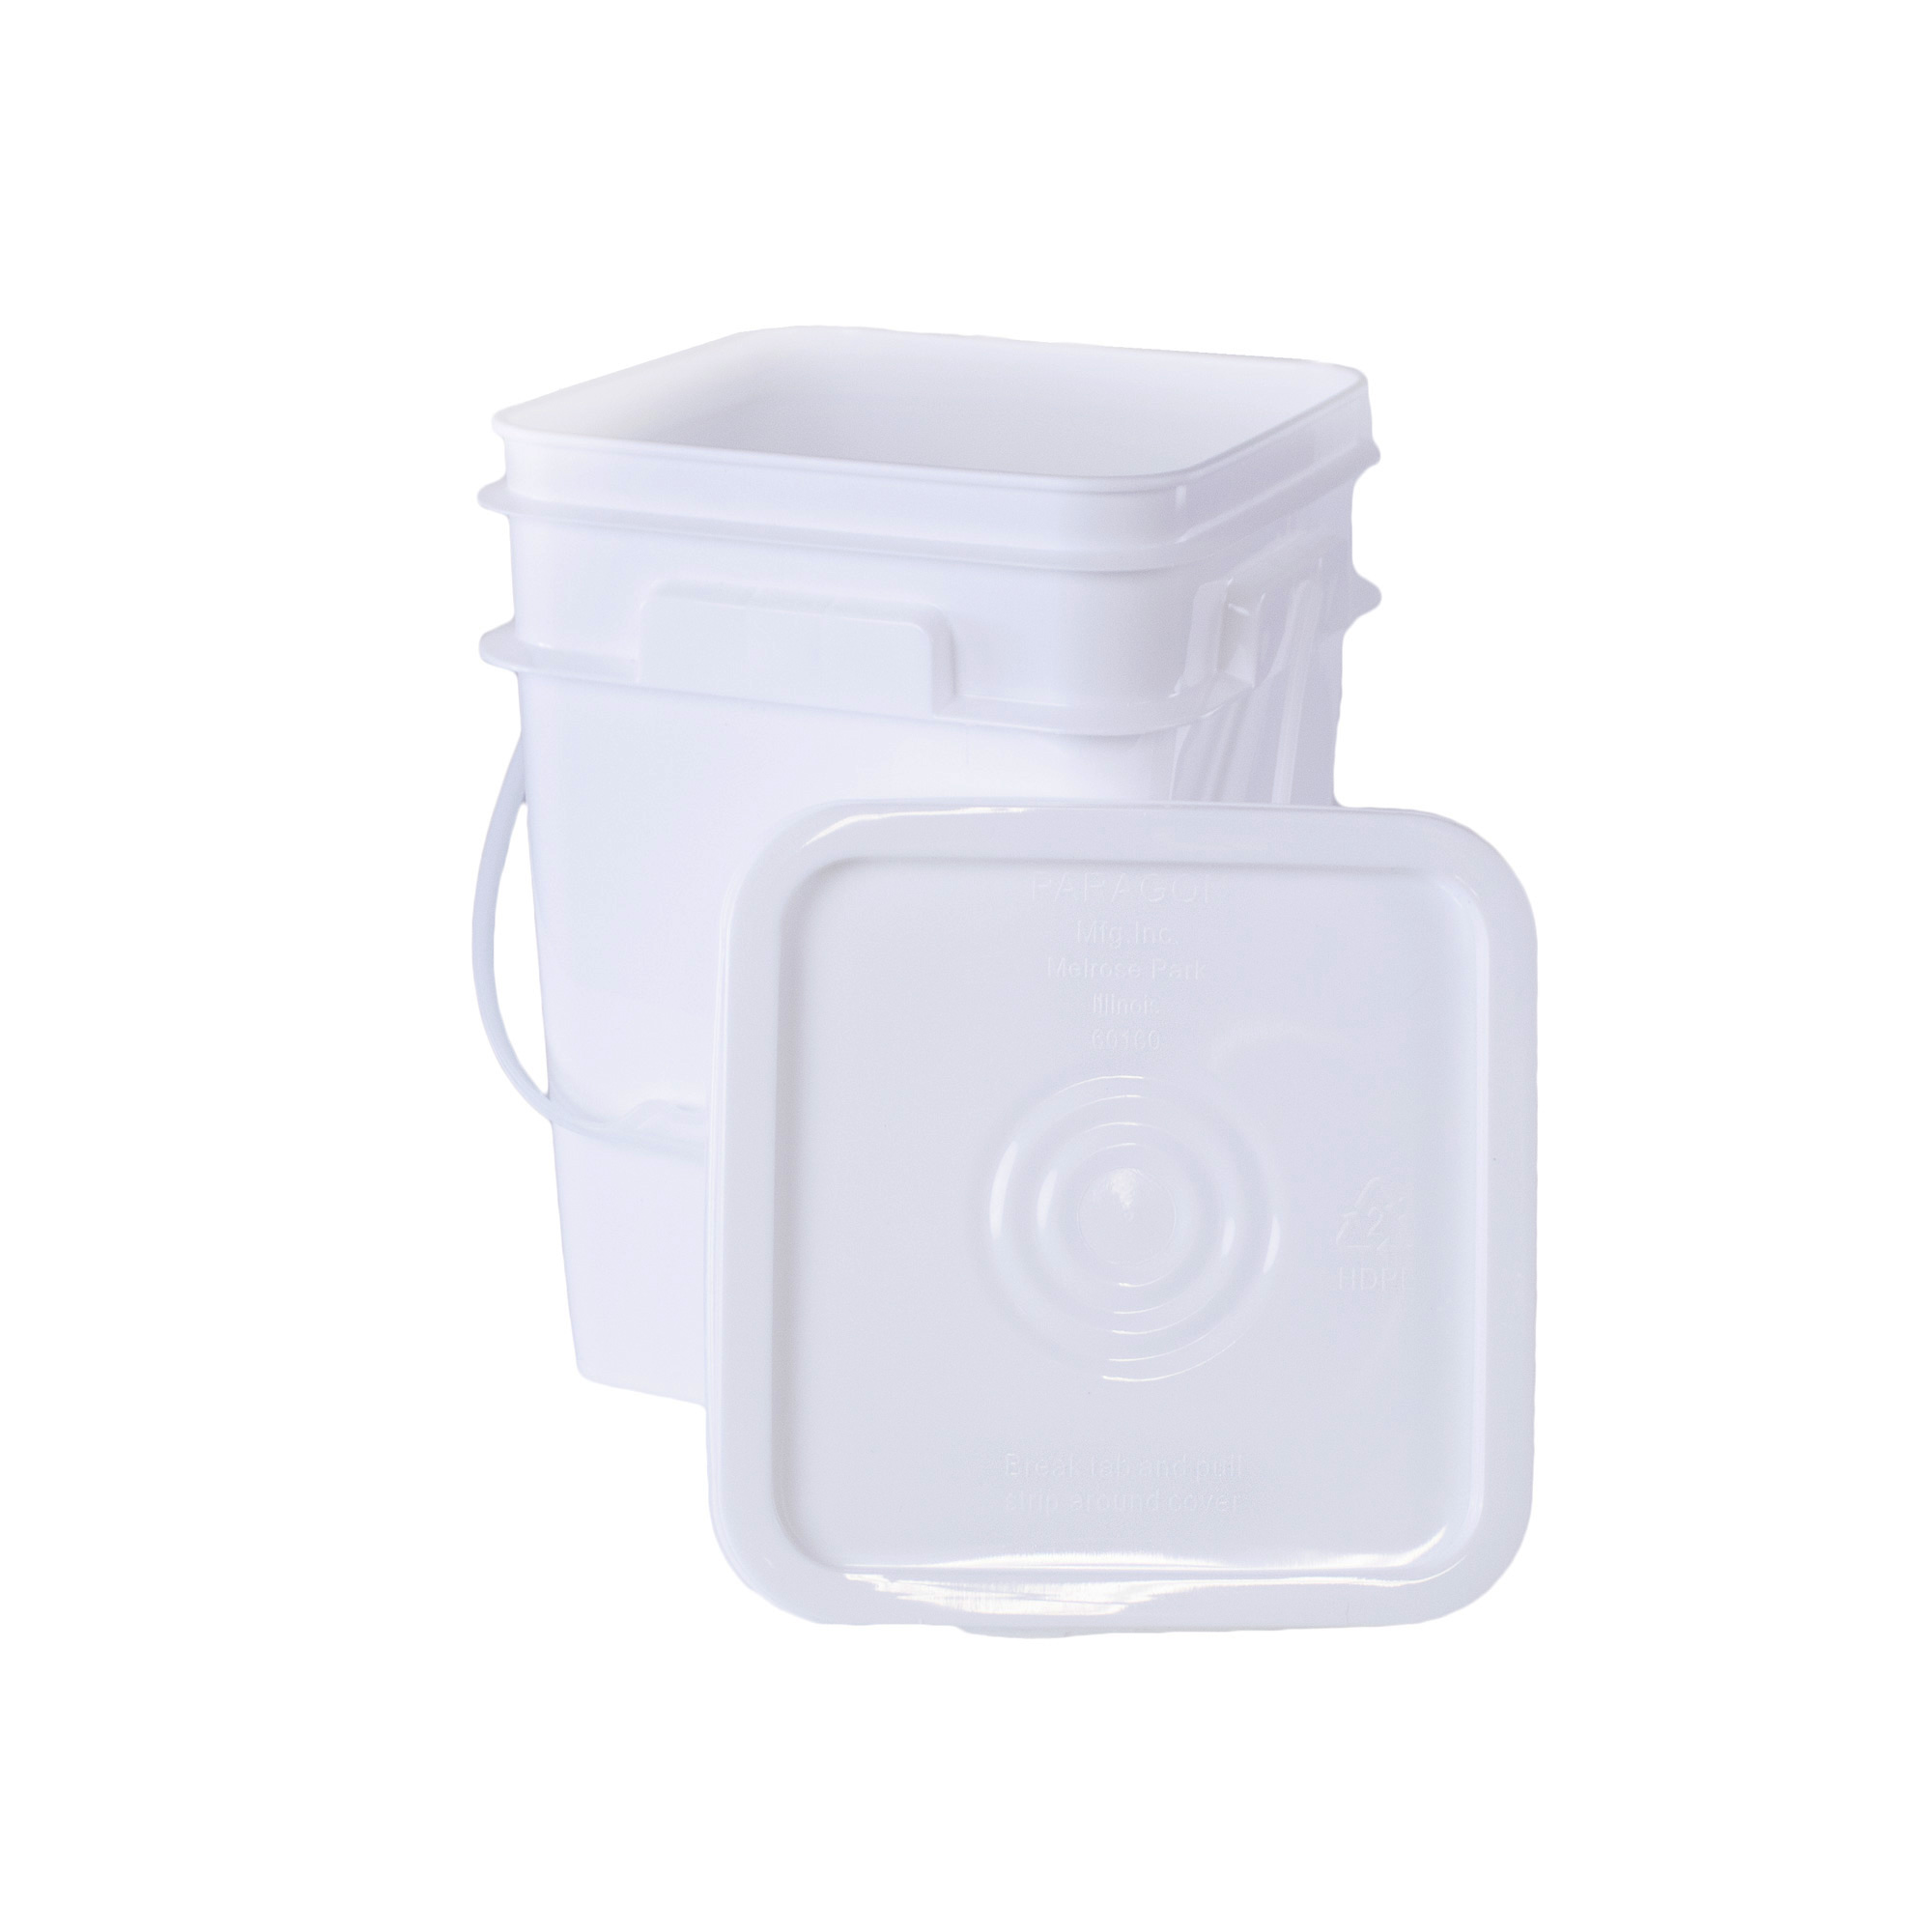 20 L BPA Free Food Grade White Bucket with Wire Handle and Lid - starting  quantity 1 count - FREE SHIPPING